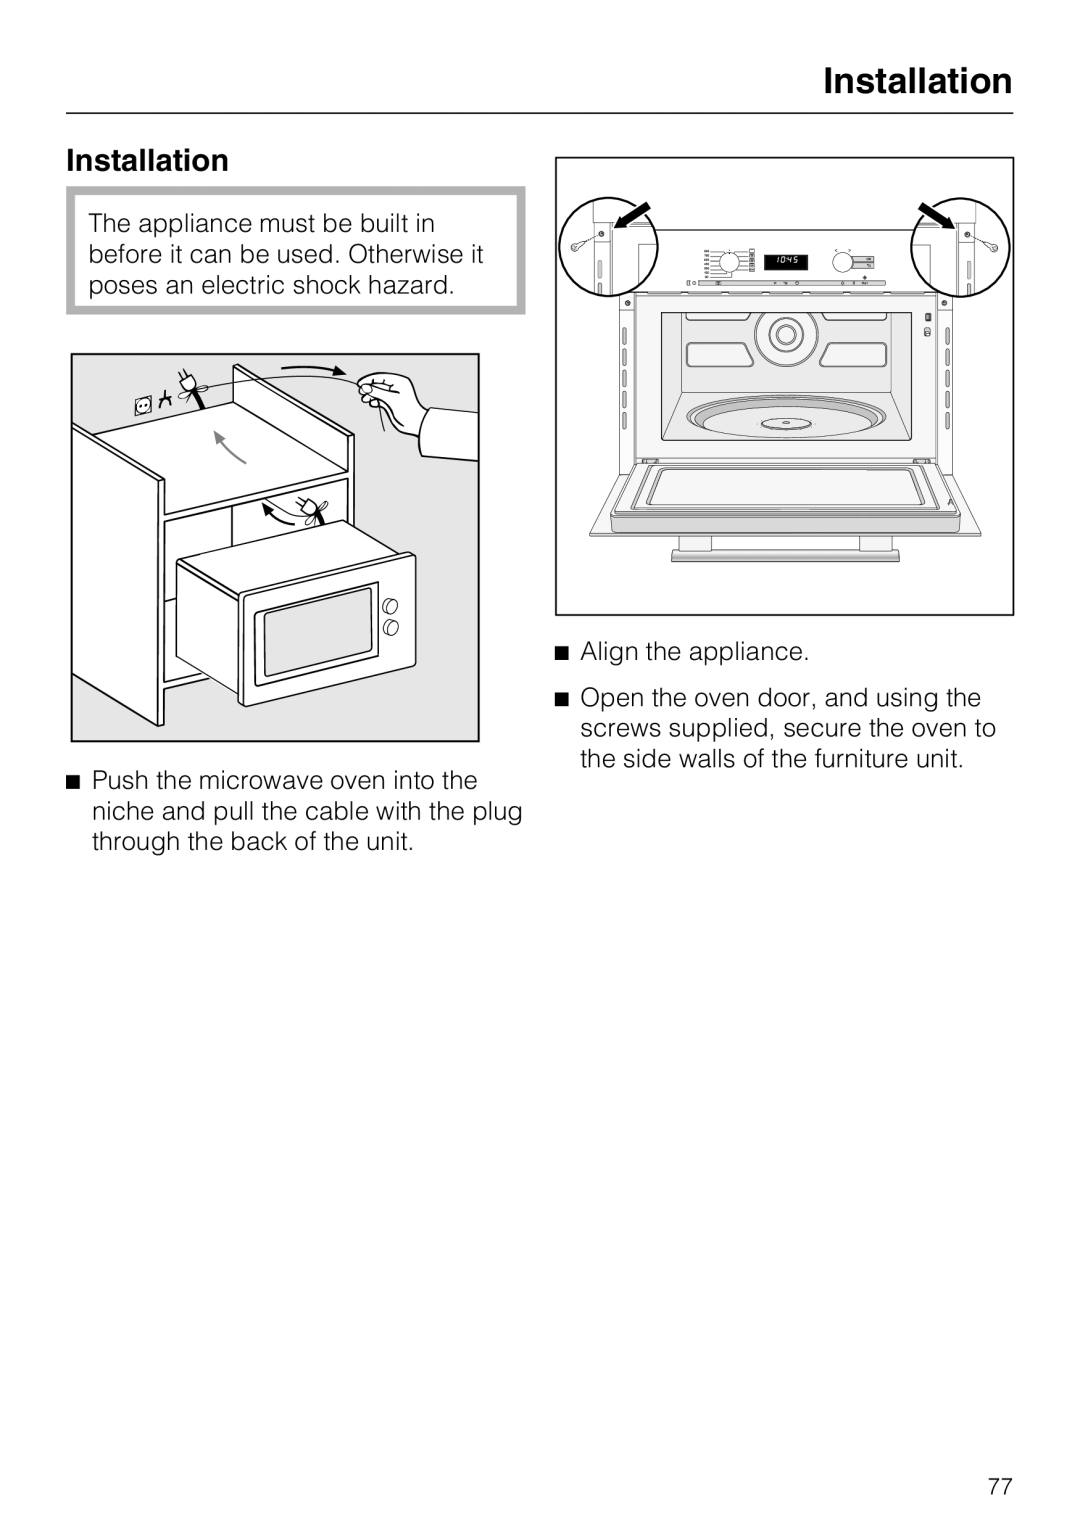 Miele 09 919 100 operating instructions Installation 